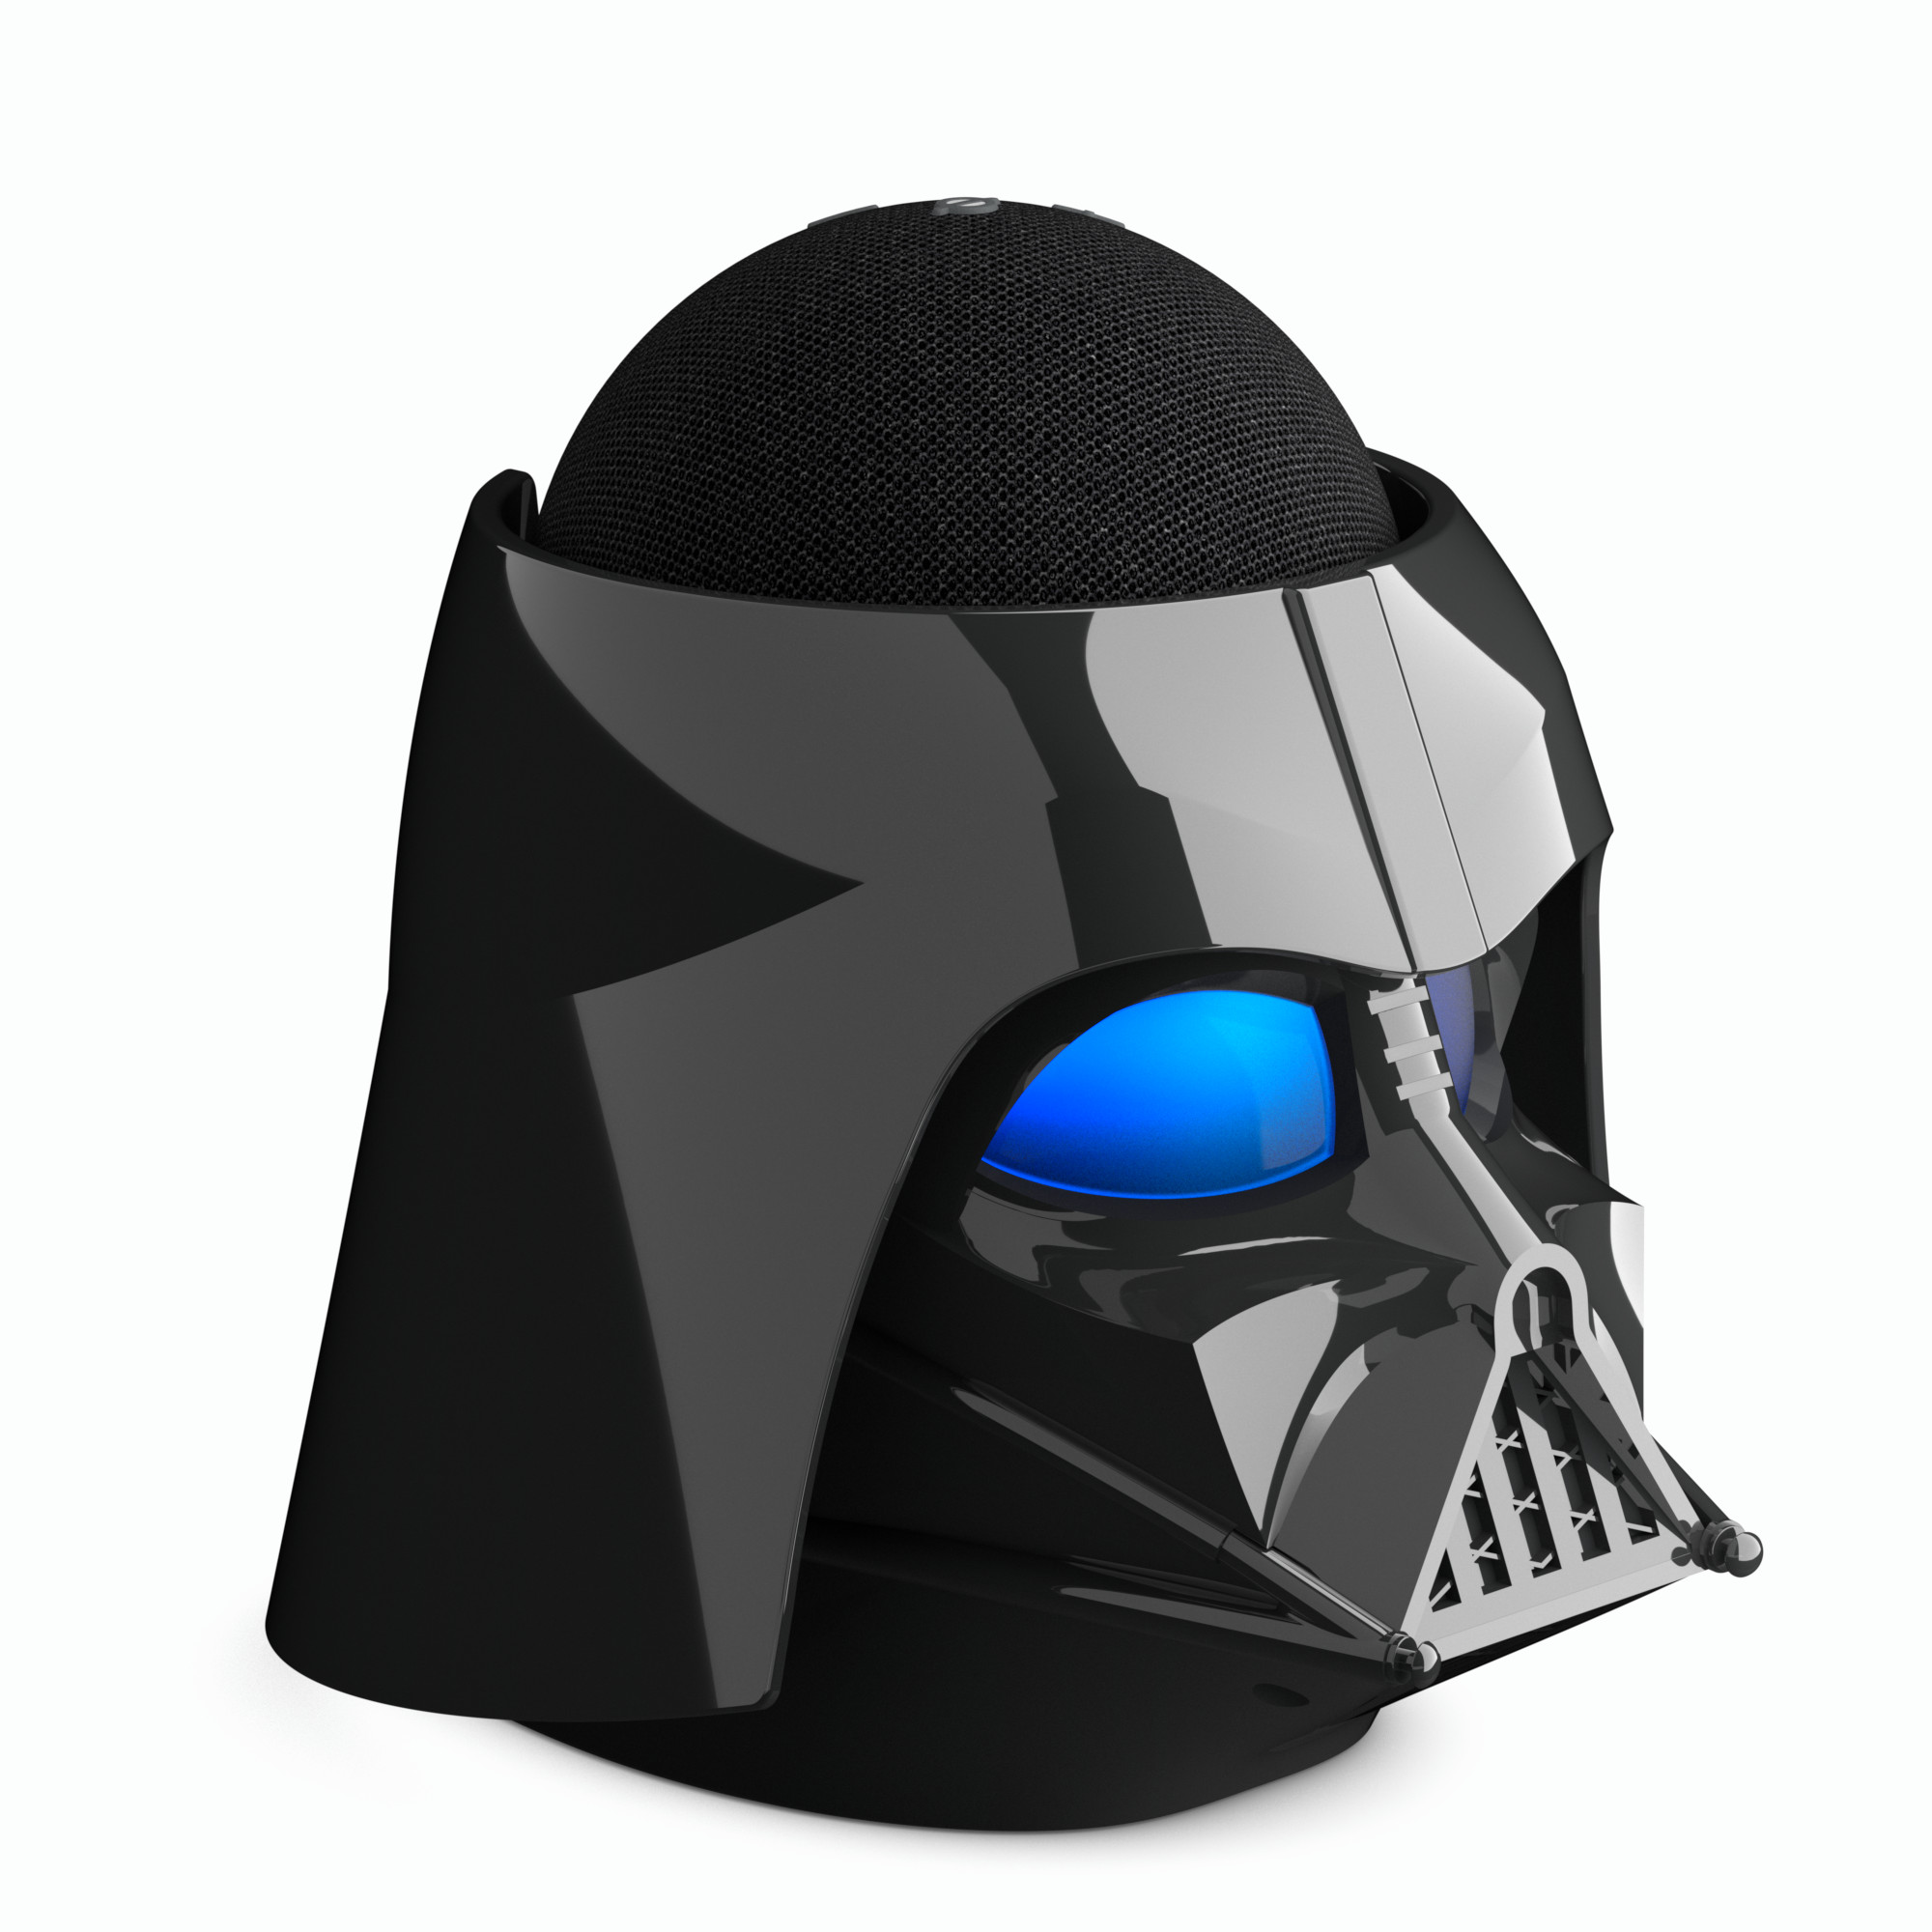 Product render of Darth Vader Helmet with Echo Dot. Lighting, compositing, and material creation were made in Cinema4D